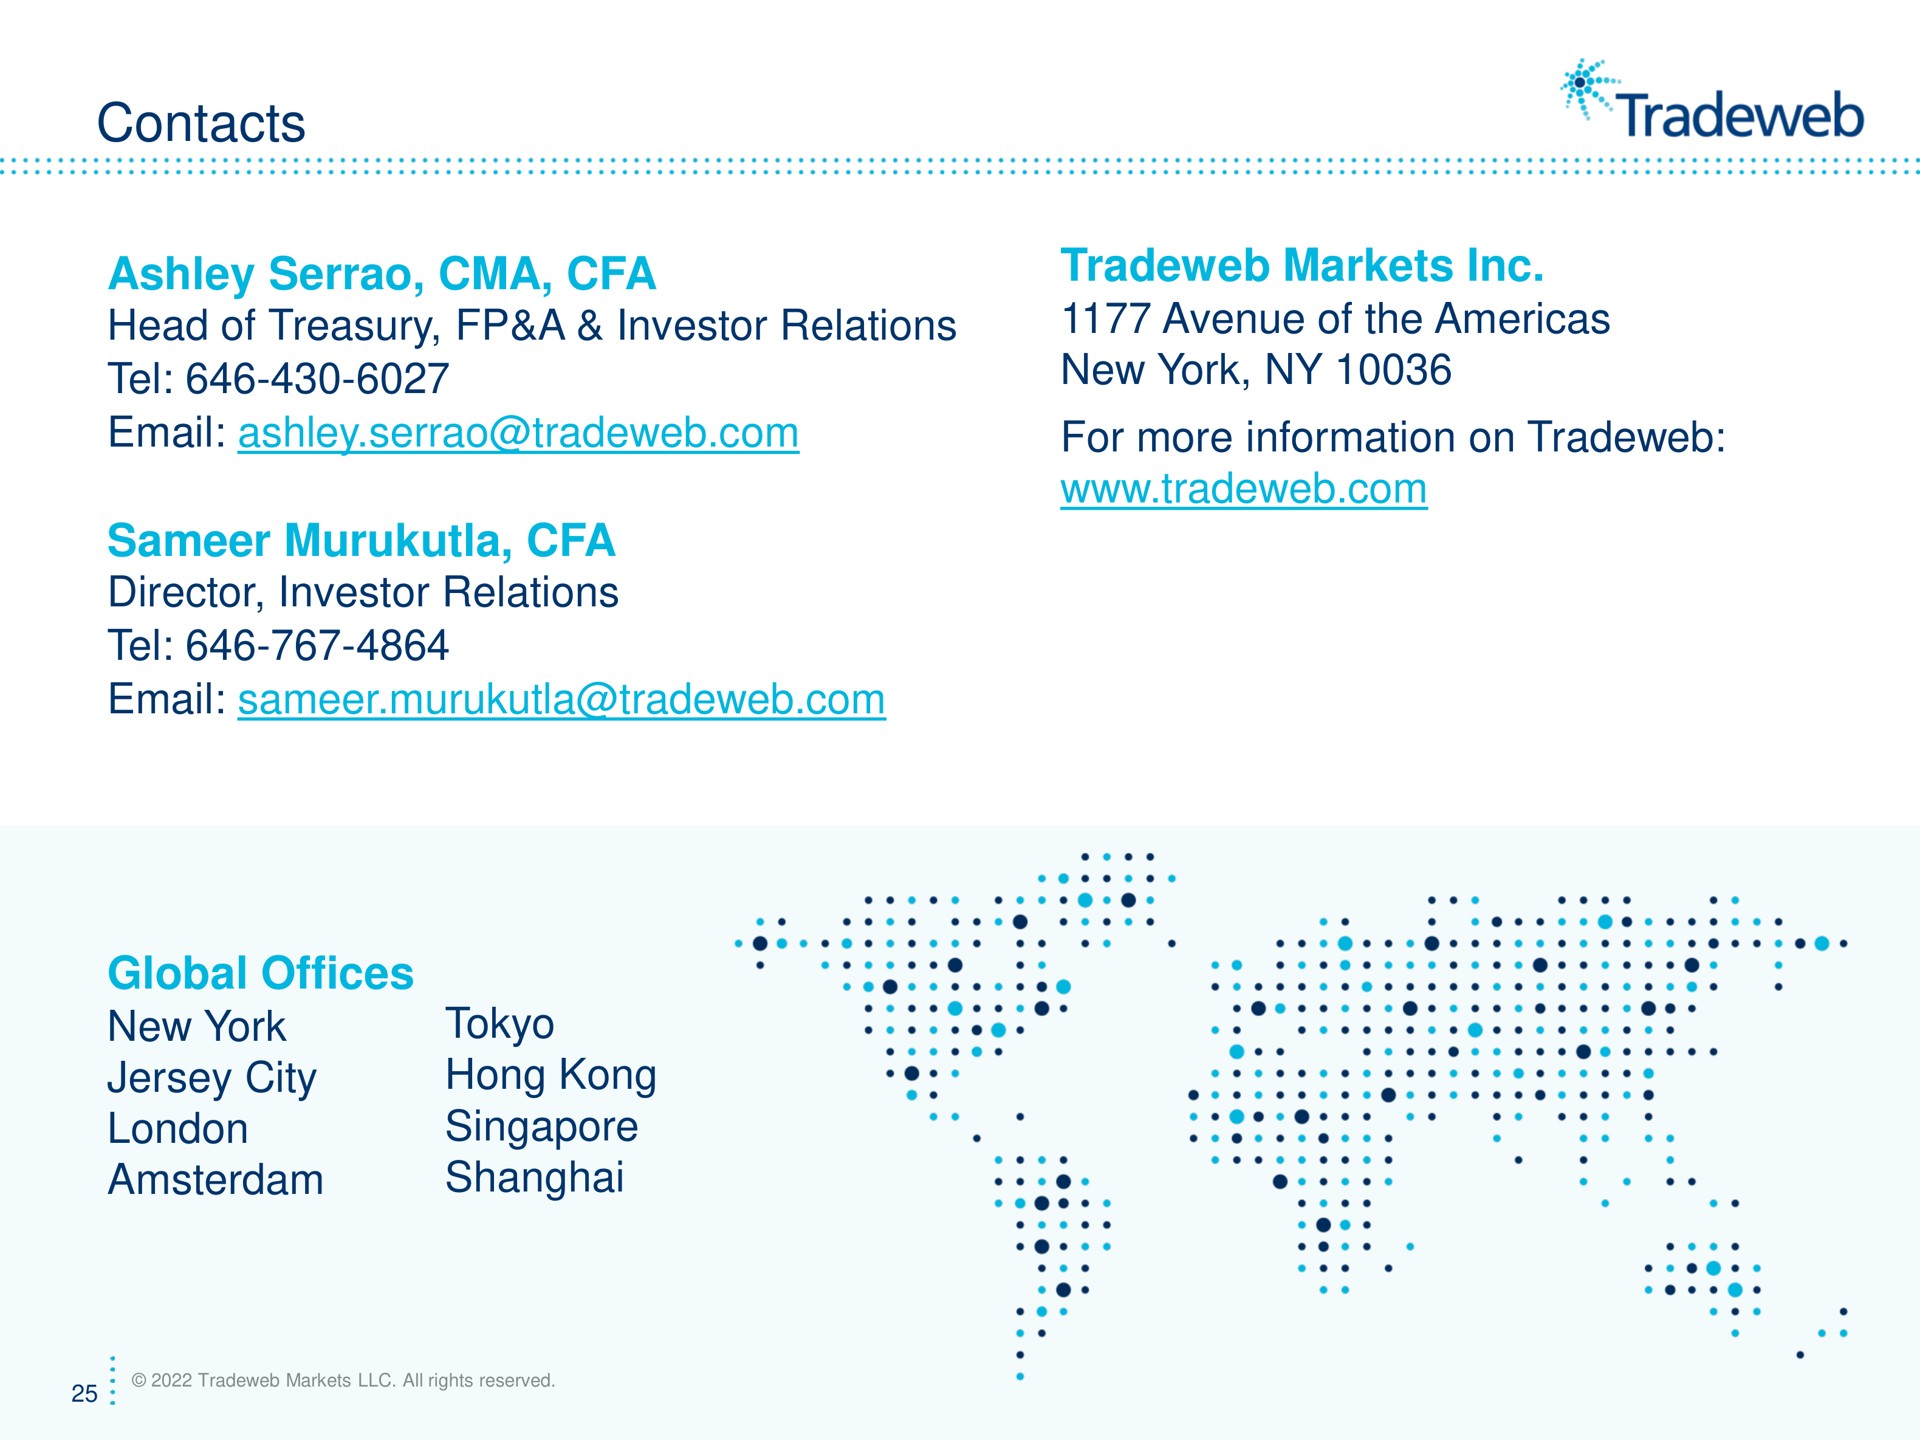 contacts head of treasury a investor relations director investor relations markets avenue of the new york for more information on global offices new york jersey city hong shanghai poe pee gee cere nace tare ace cesses vise ses wee | Tradeweb